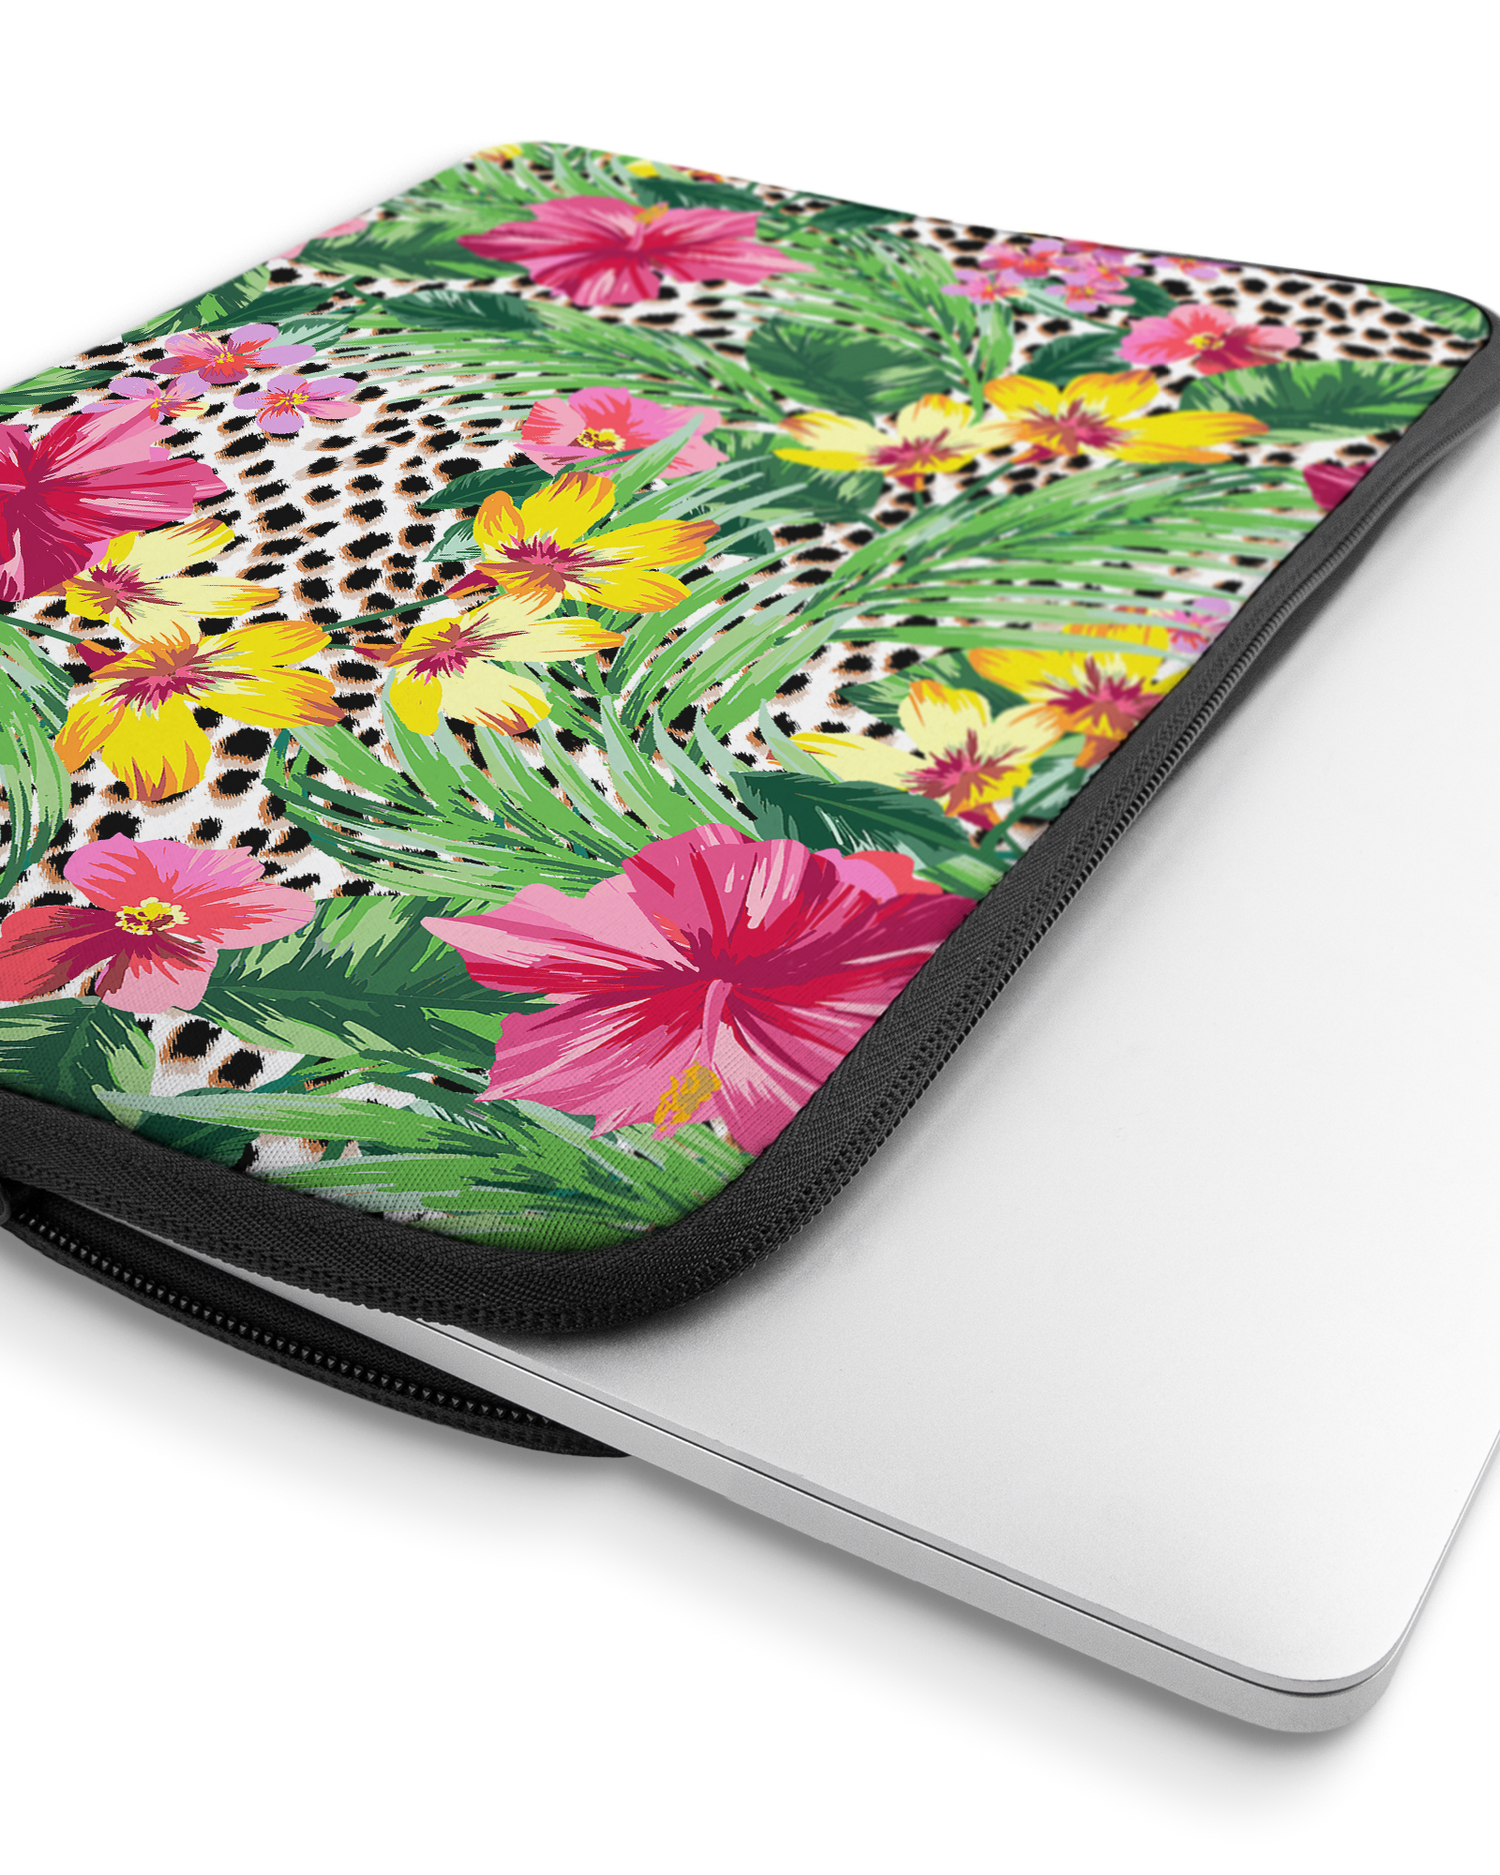 Tropical Cheetah Laptop Case 16 inch with device inside